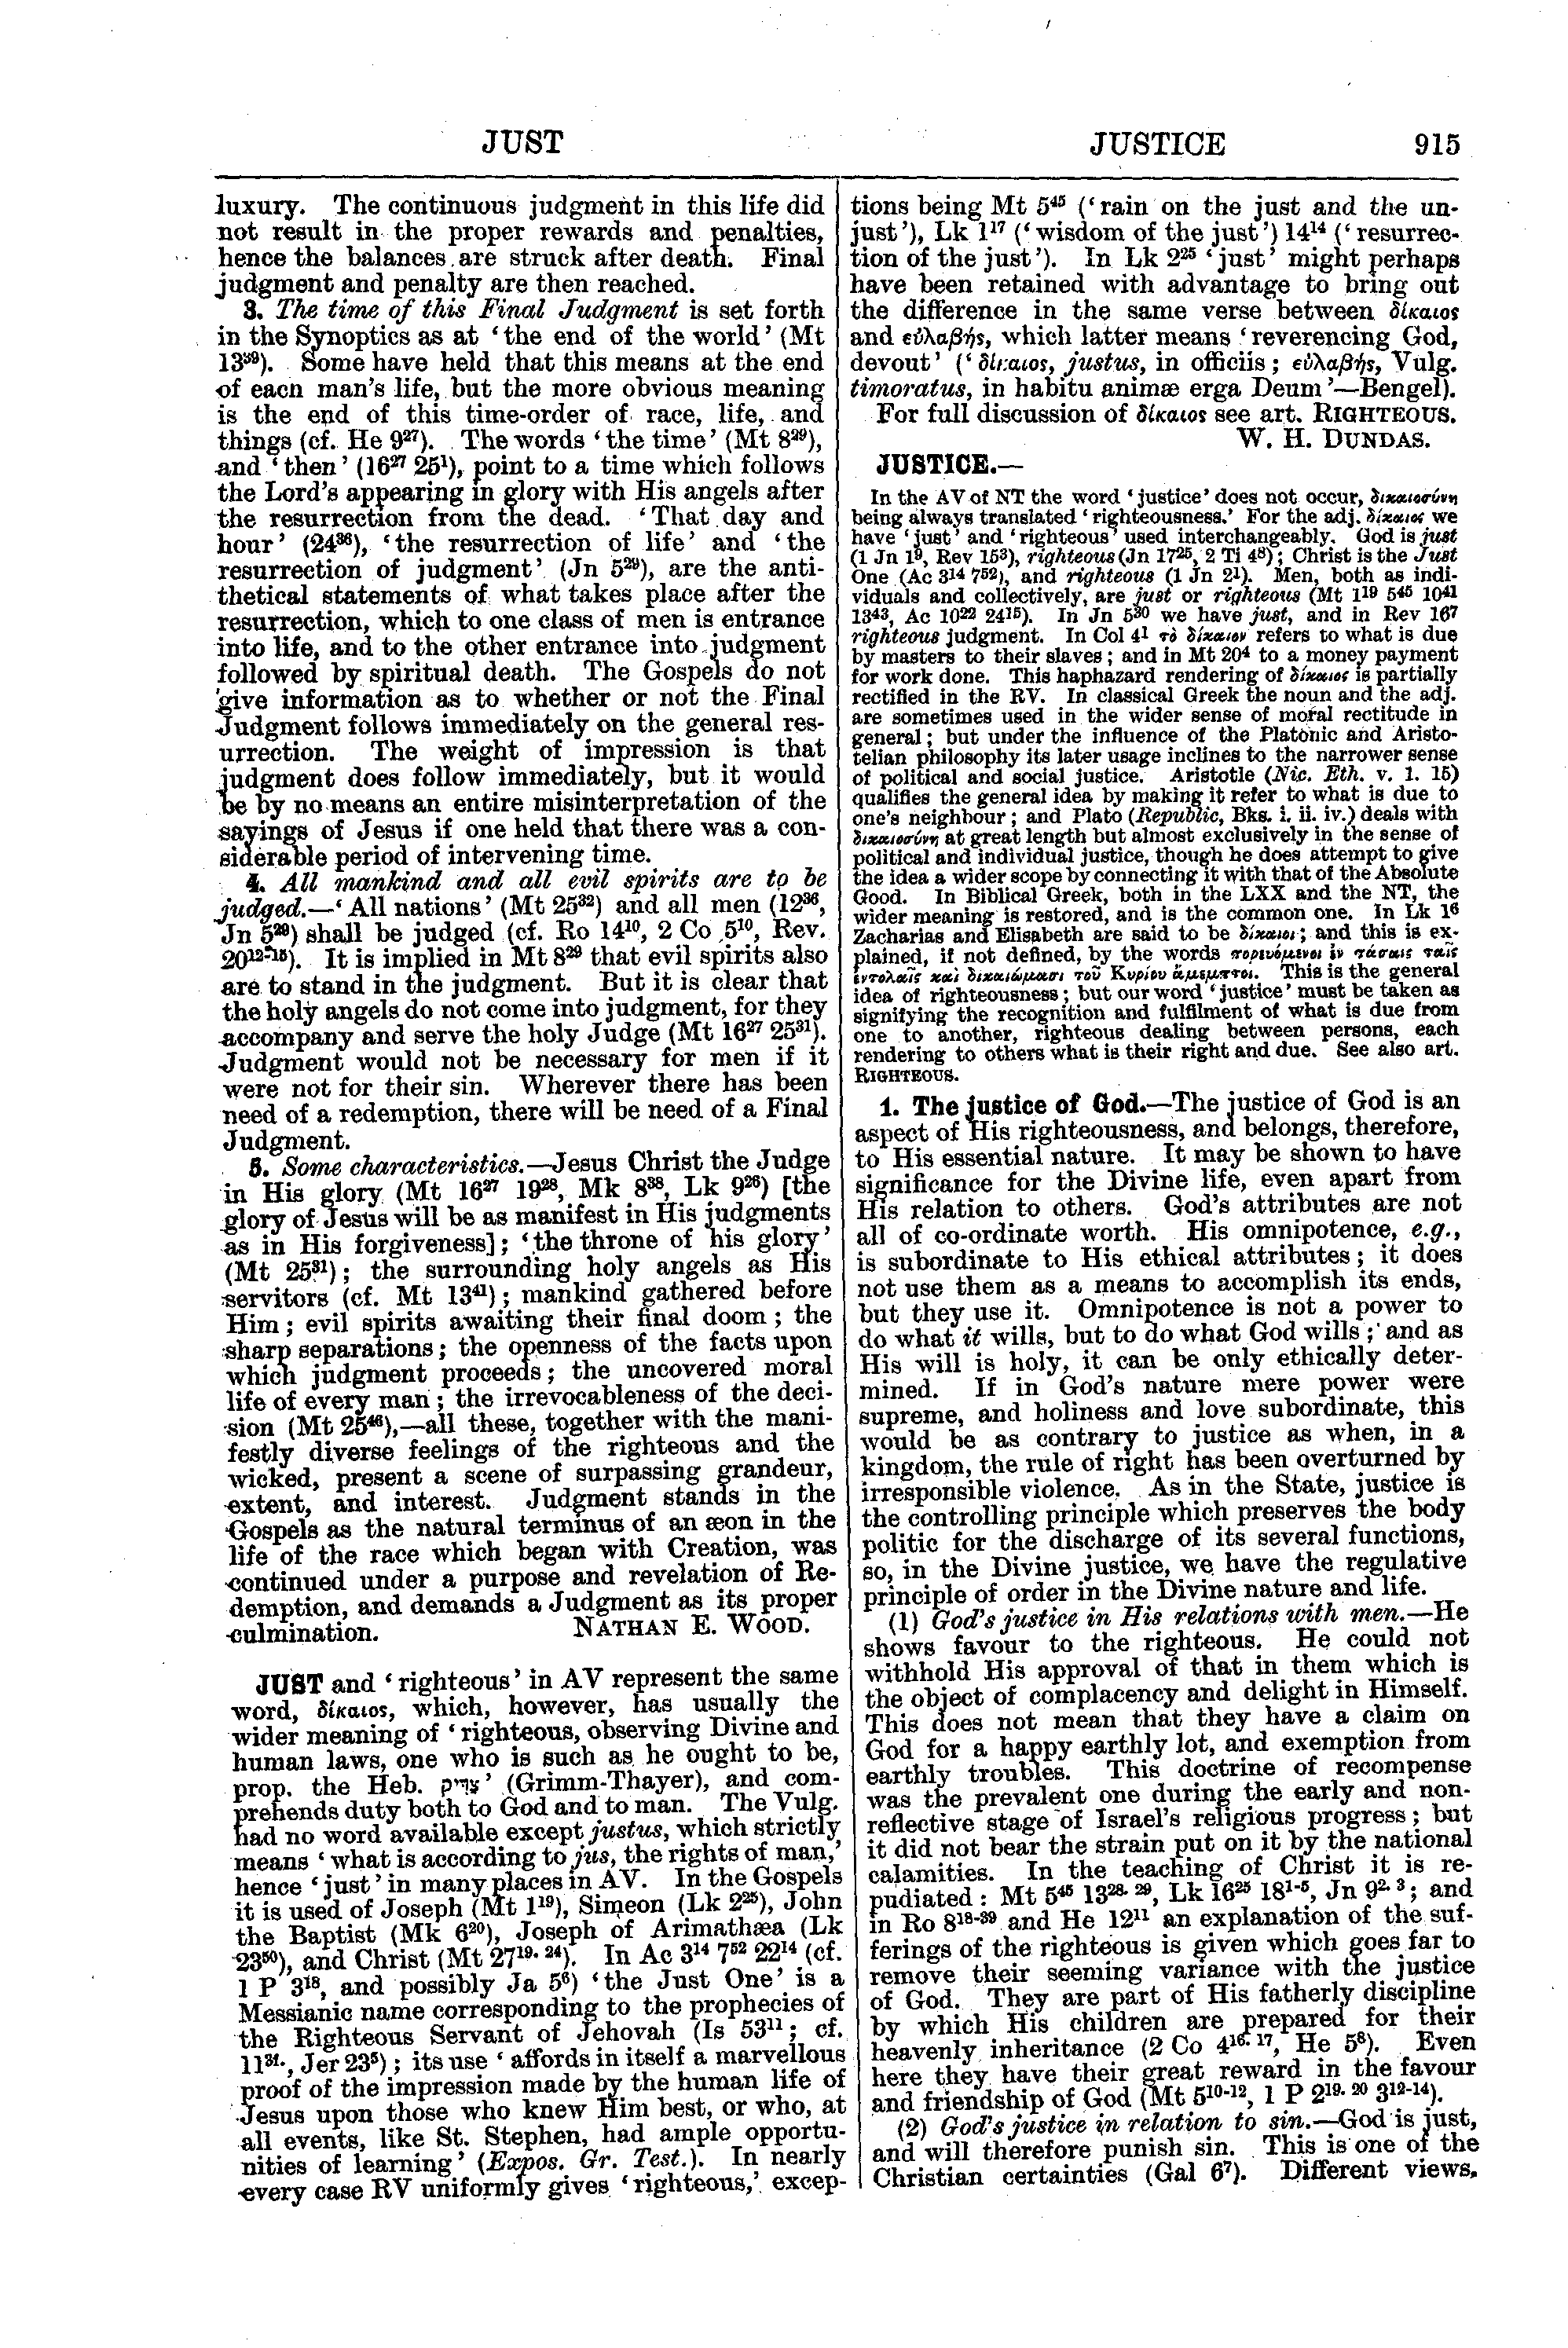 Image of page 915